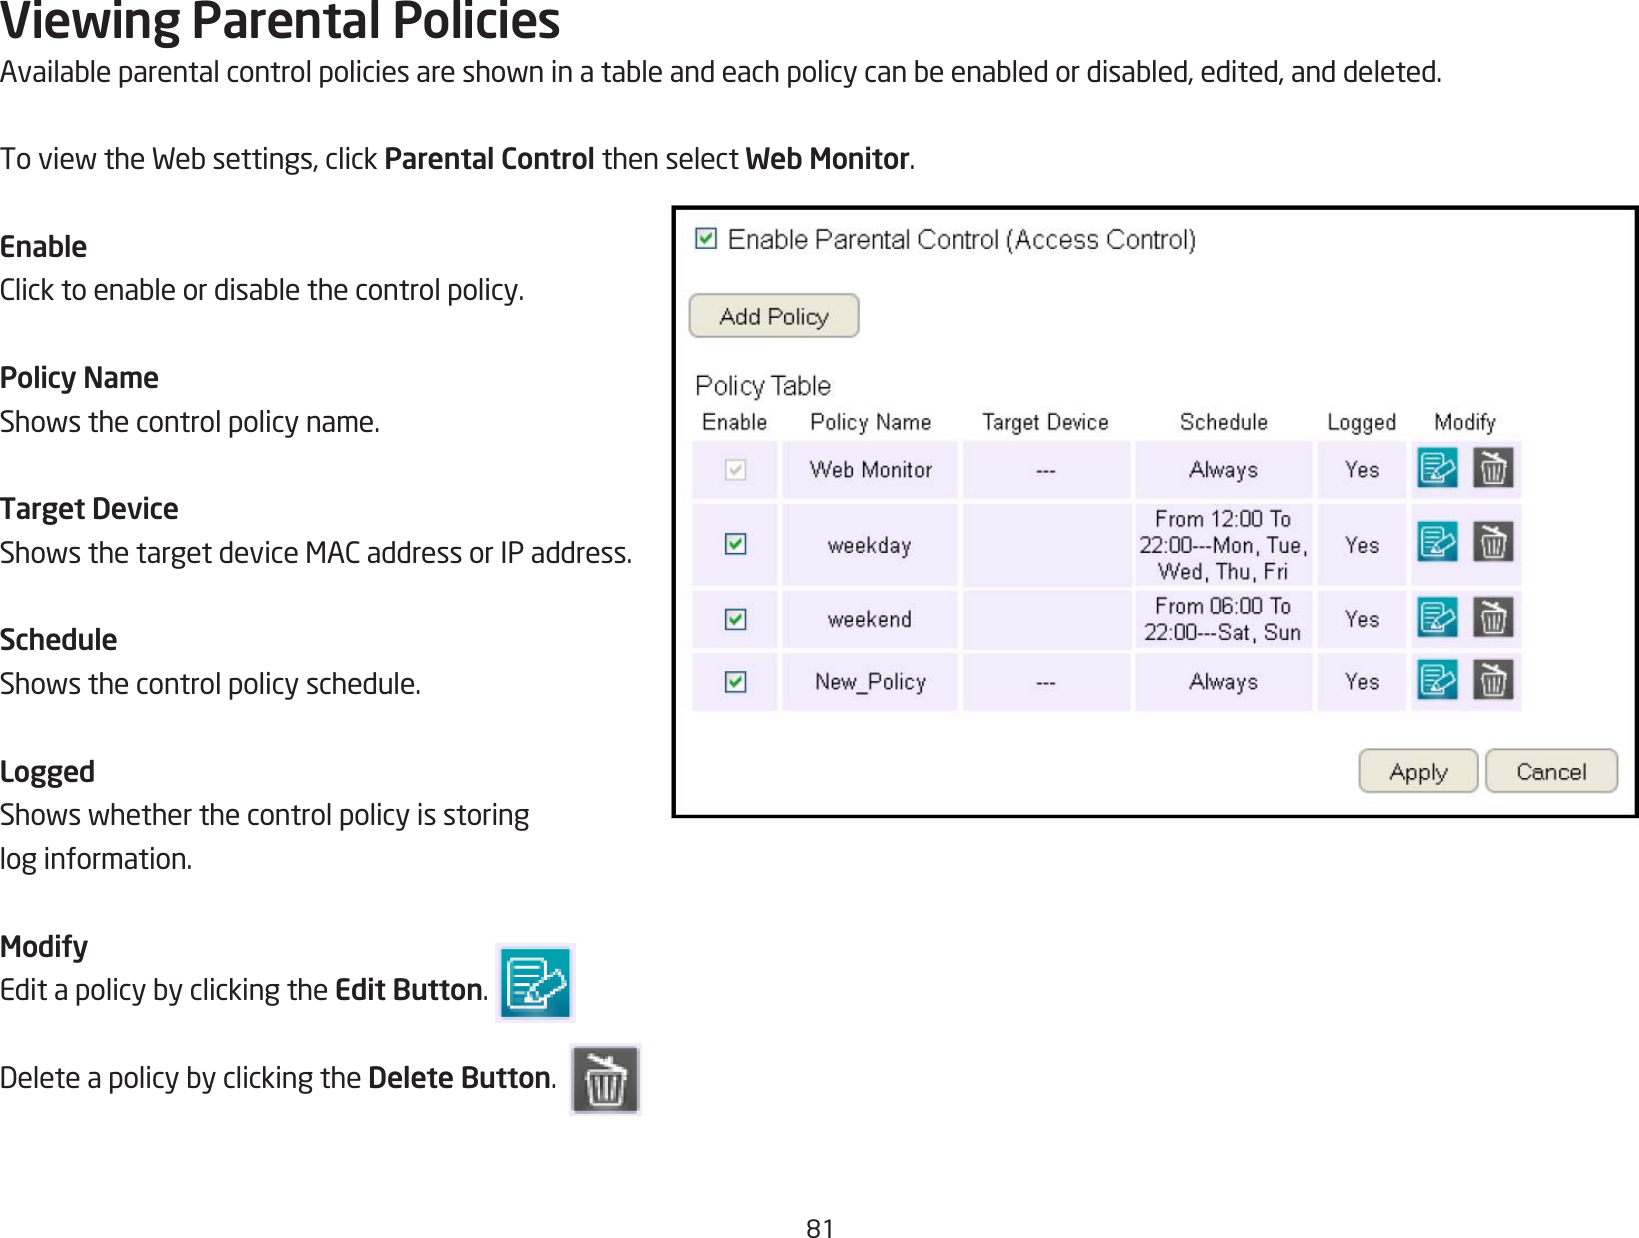 81Viewing Parental PoliciesAvailableparentalcontrolpoliciesareshowninatableandeachpolicycanbeenabledordisabled,edited,anddeleted.ToviewtheWebsettings,clickParental Control then select Web Monitor.EnableClicktoenableordisablethecontrolpolicy.Policy NameShowsthecontrolpolicyname.Target DeviceShowsthetargetdeviceMACaddressorIPaddress.ScheduleShowsthecontrolpolicyschedule.LoggedShowswhetherthecontrolpolicyisstoringlog information.ModifyEditapolicybyclickingtheEdit Button. DeleteapolicybyclickingtheDelete Button.